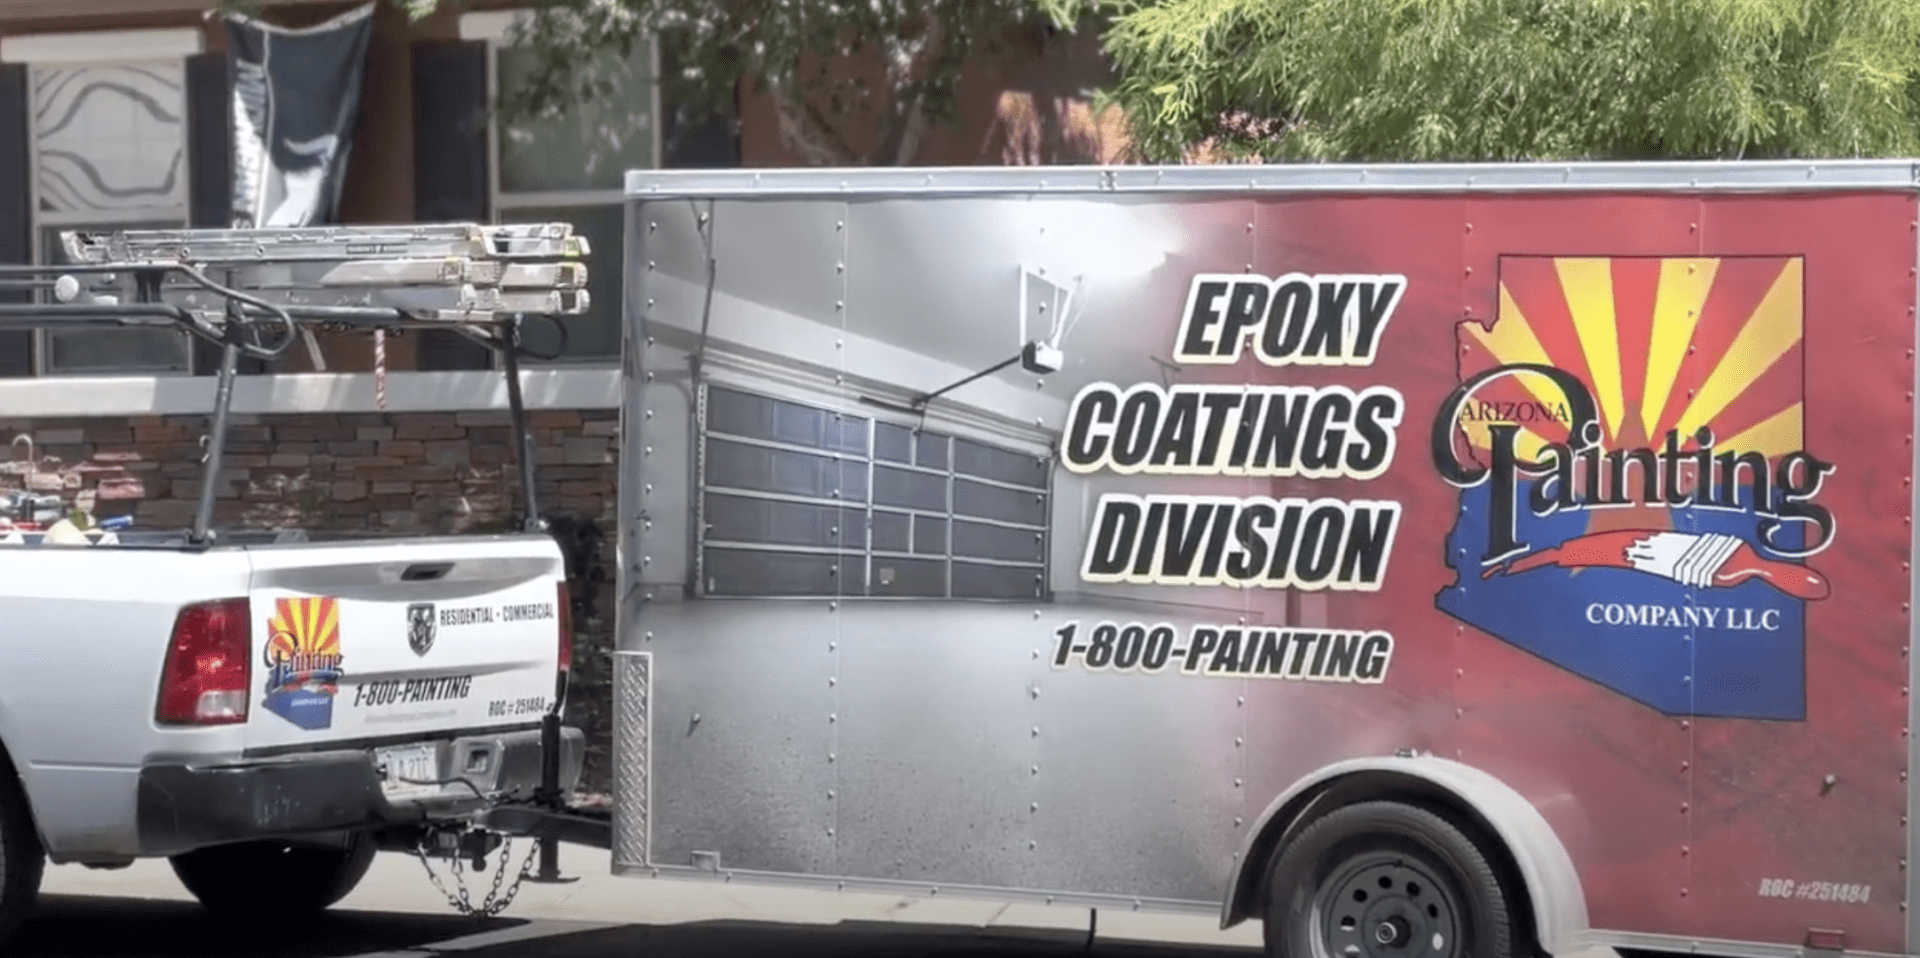 Epoxy Coatings Division truck and trailer